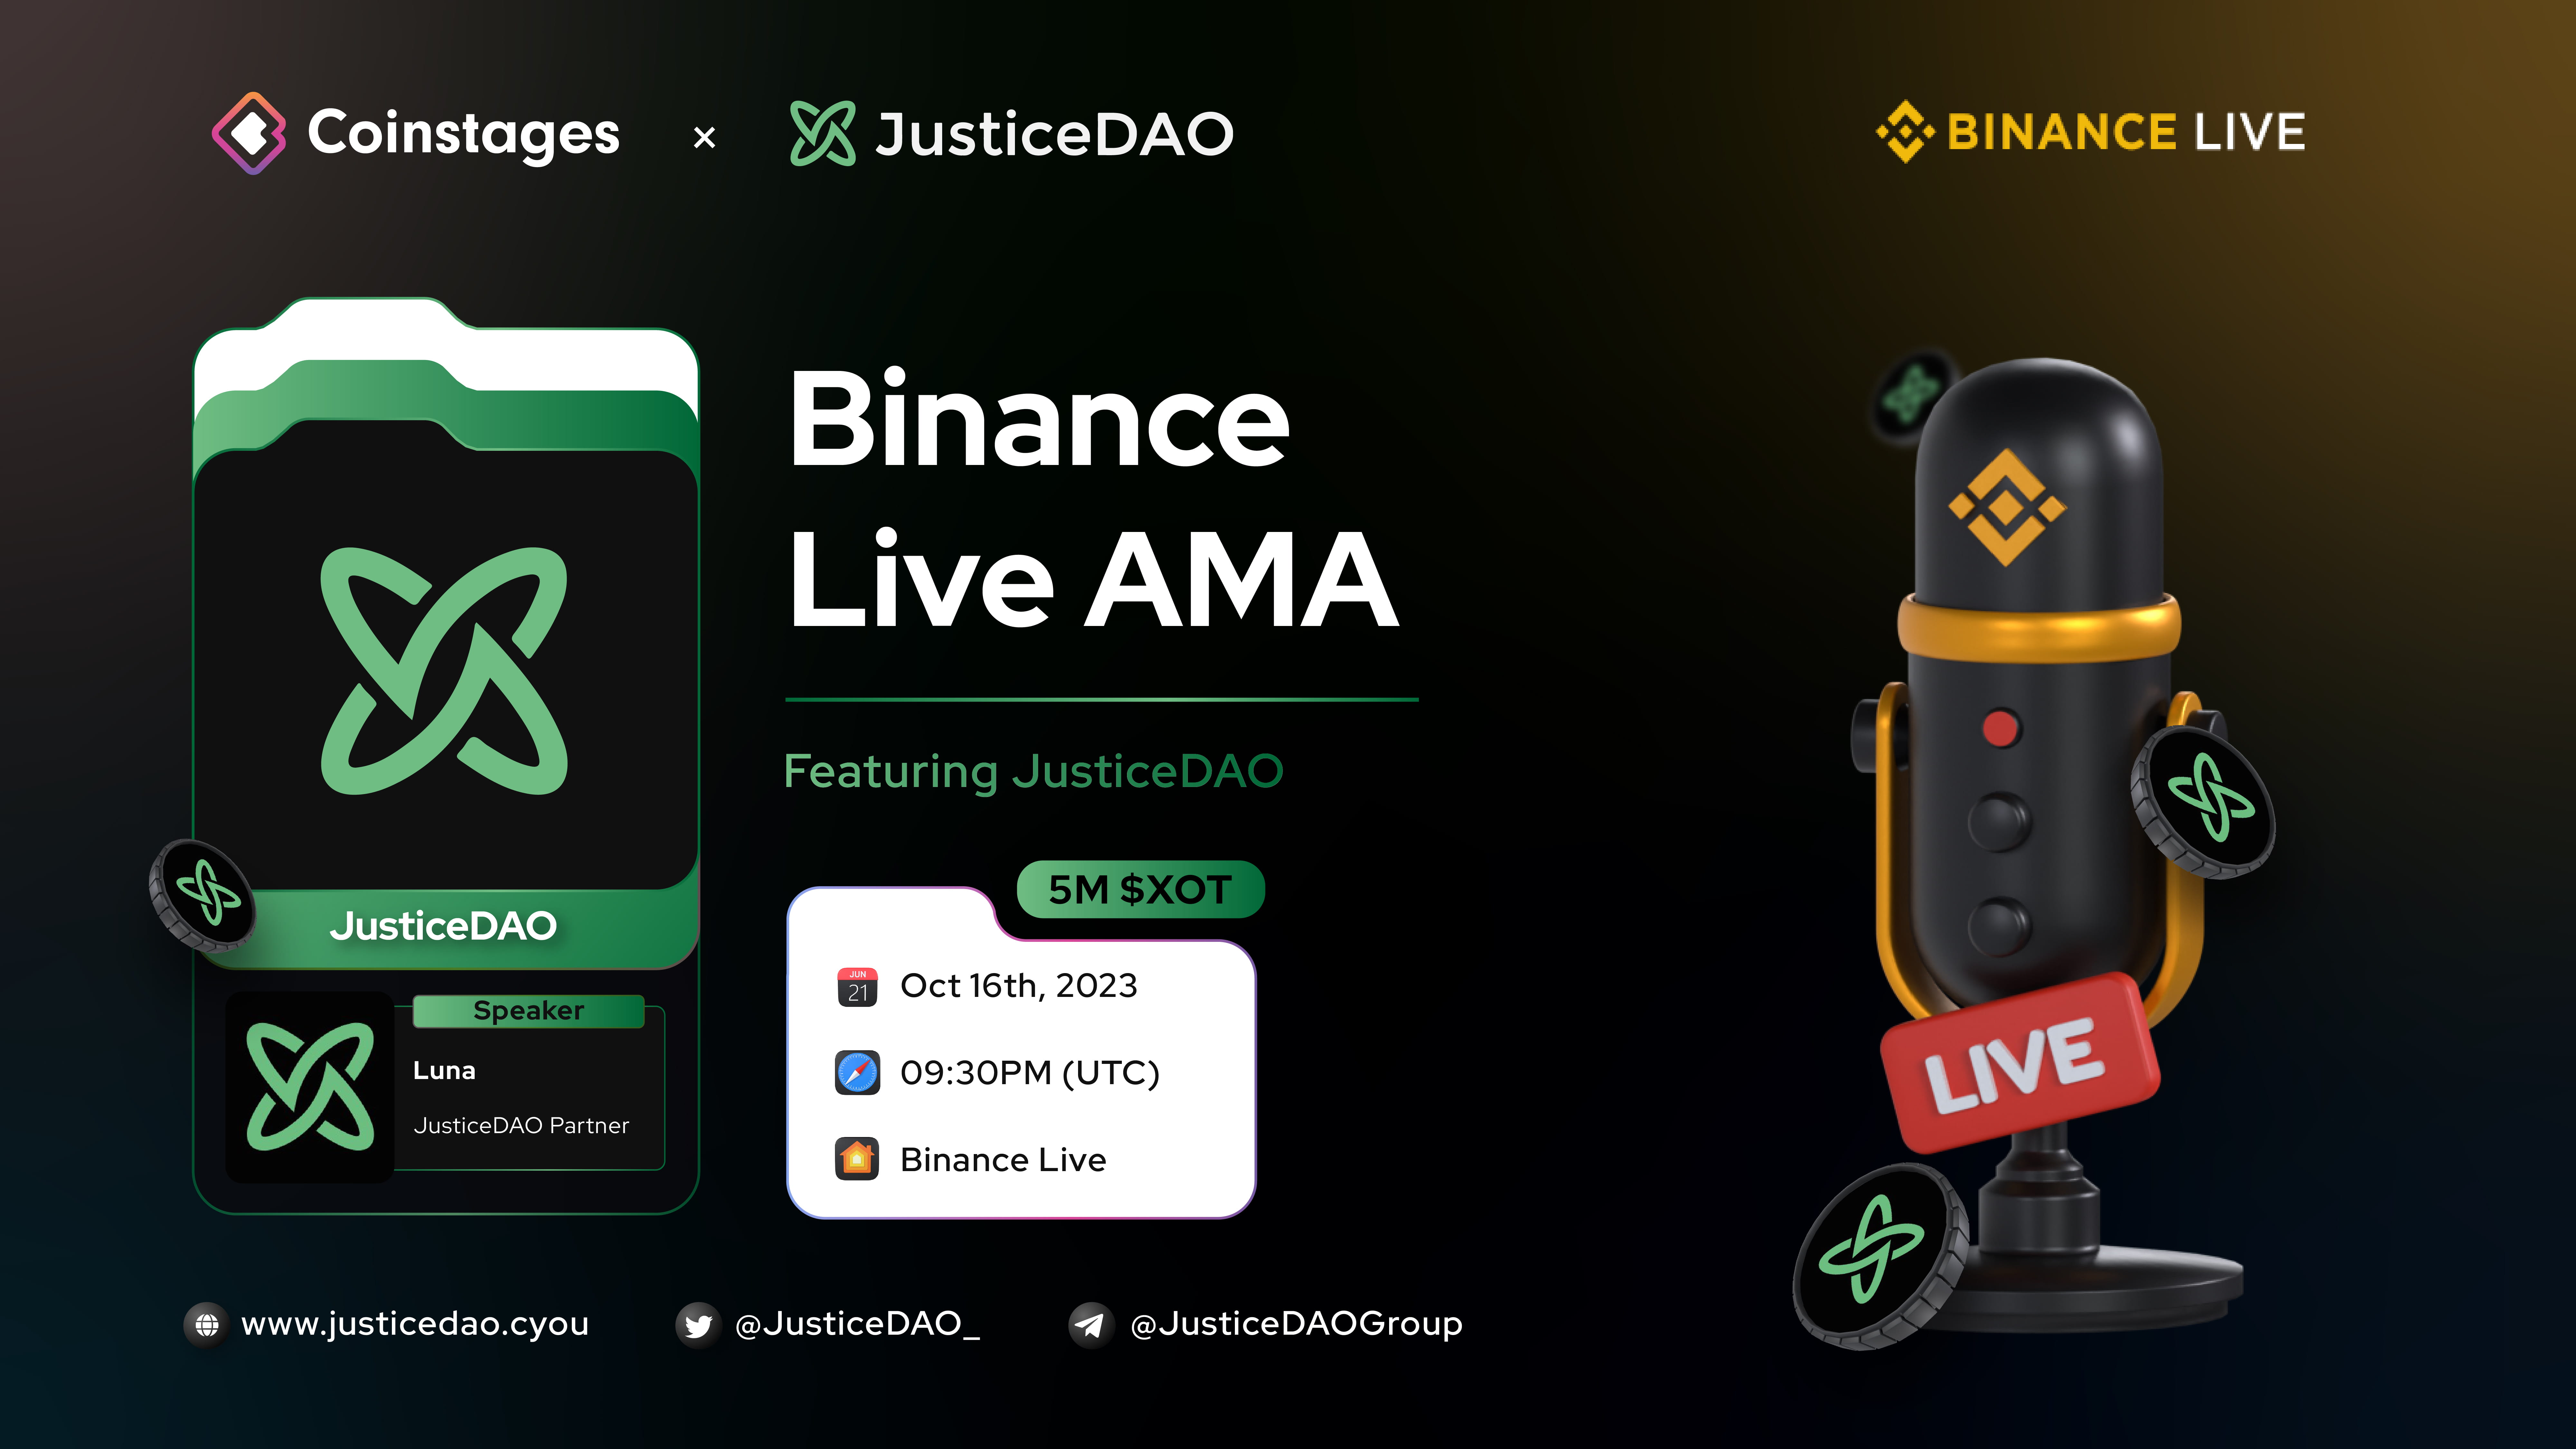 Coinstages Live AMA: Featuring JusticeDAO